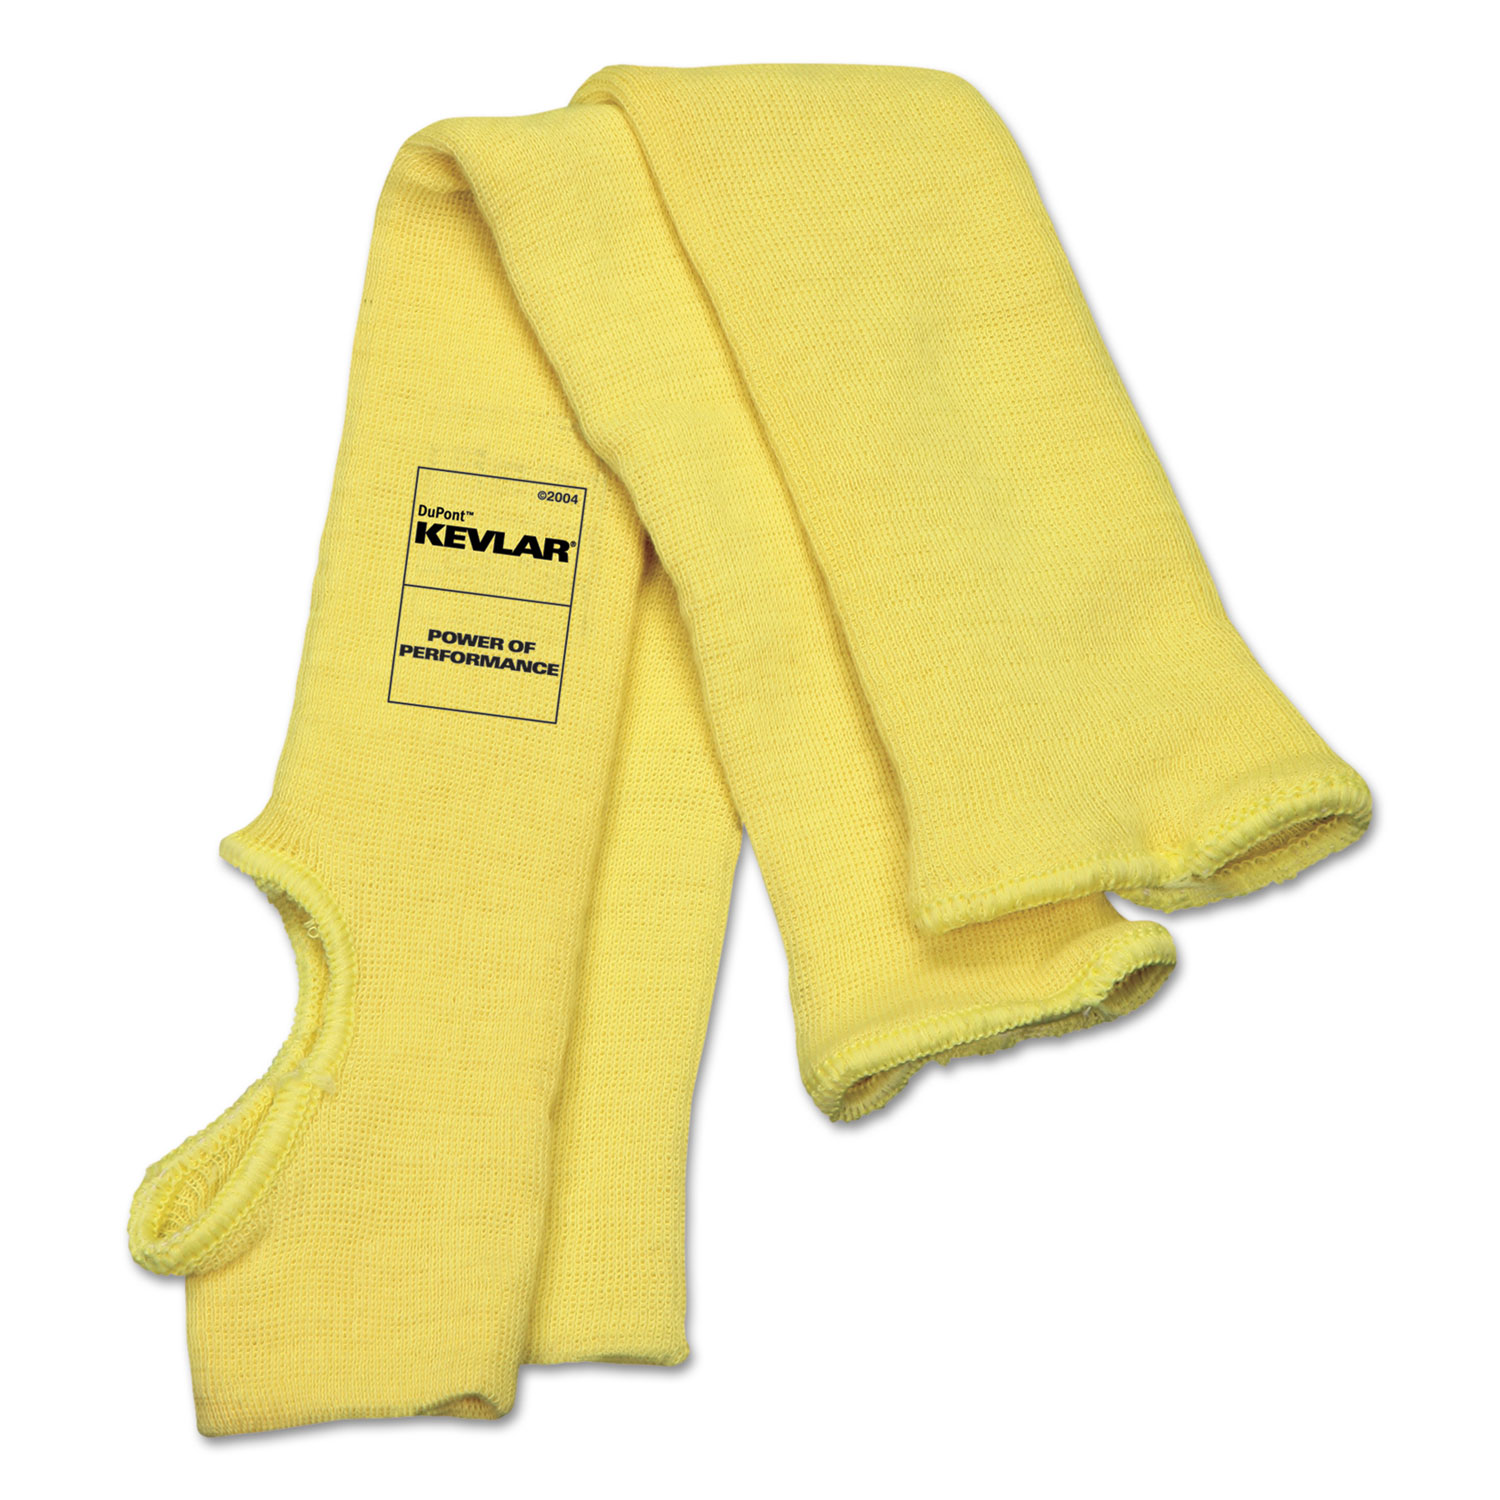  MCR Safety 9378TE Economy Series DuPont Kevlar Fiber Sleeves, One Size Fits All, Yellow, 1 Pair (CRW9378TE) 